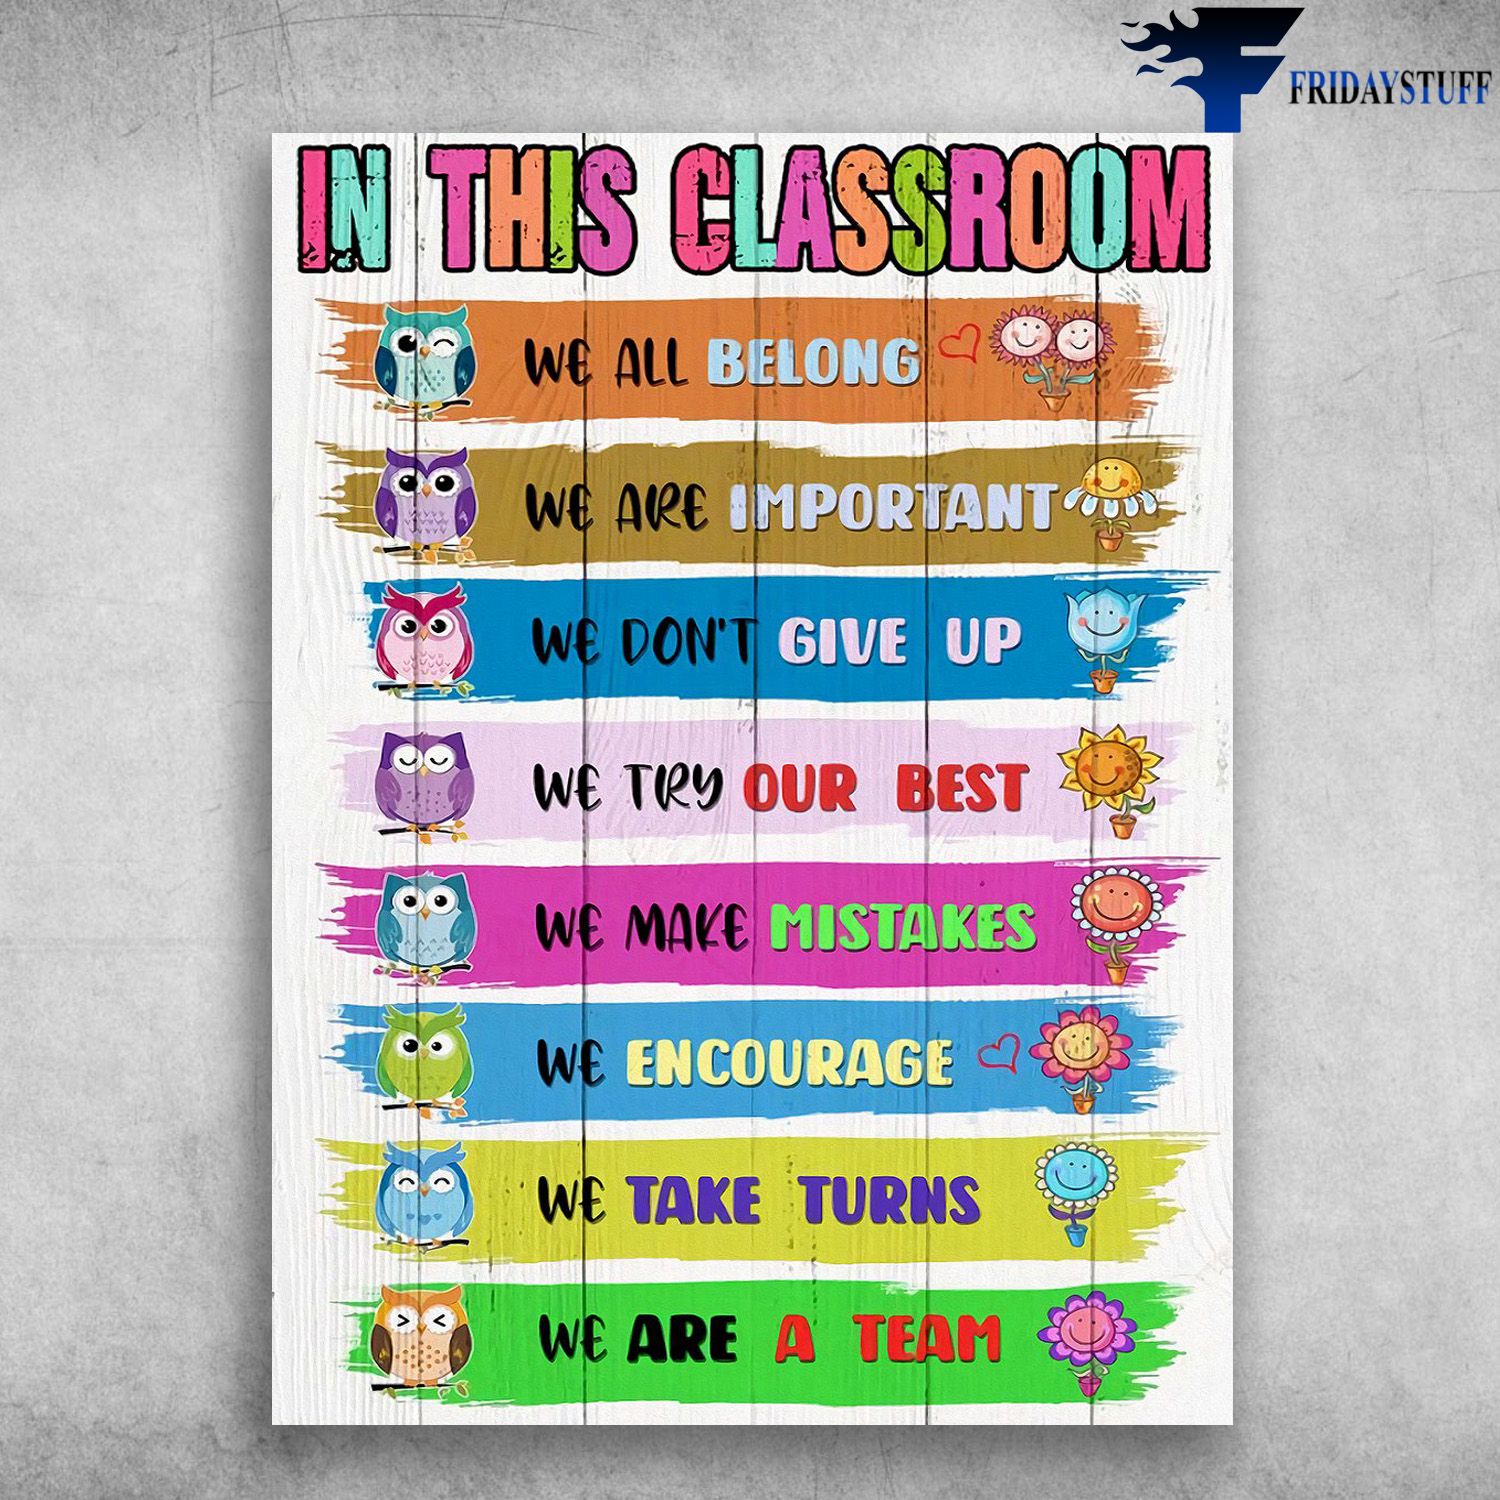 Classroom Poster, Classroom Rules - In This Classroom, We All Belong, We Are Important, We Don't Give Up, We Try Our Best, We Make Mistakes, We Encourage, We Take Turns, We Are A Team